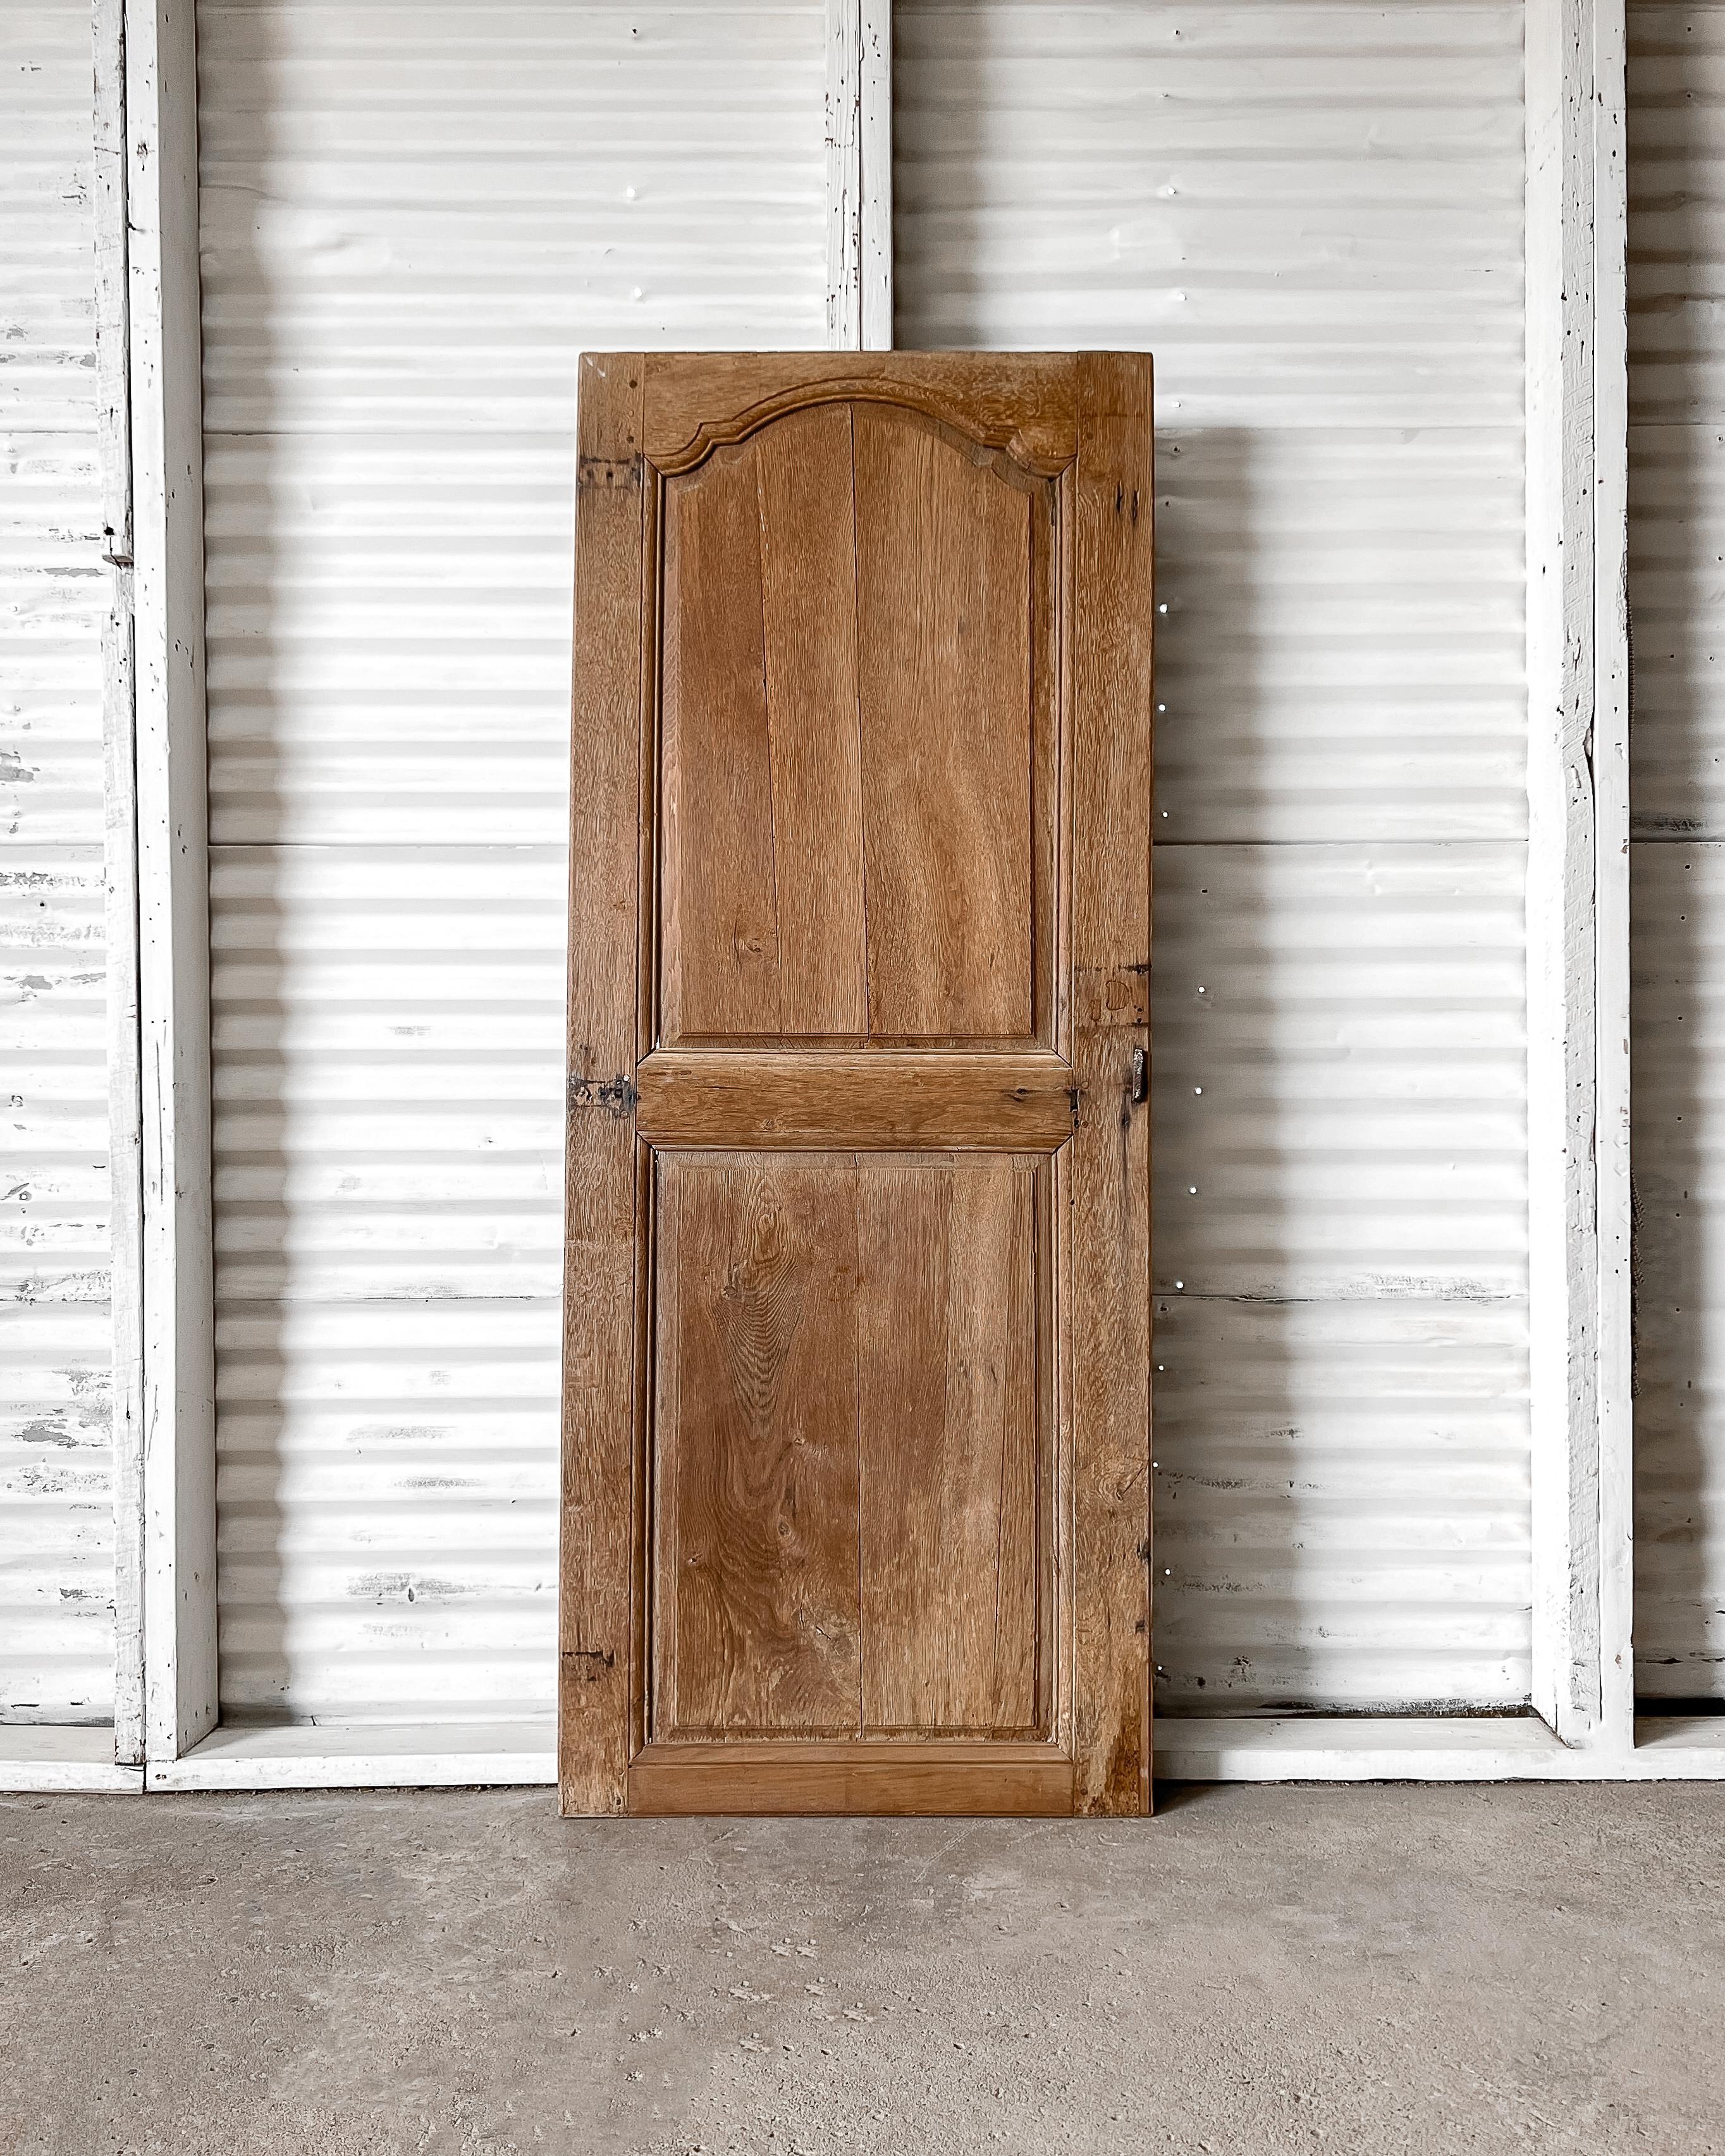 19th-century French provincial wardrobe door with carved upper panel and grooved beveled trim detailing. Install in a new home to enclose a pantry or linen cupboard to instantly add a layer of charm and character that can’t be replicated with modern